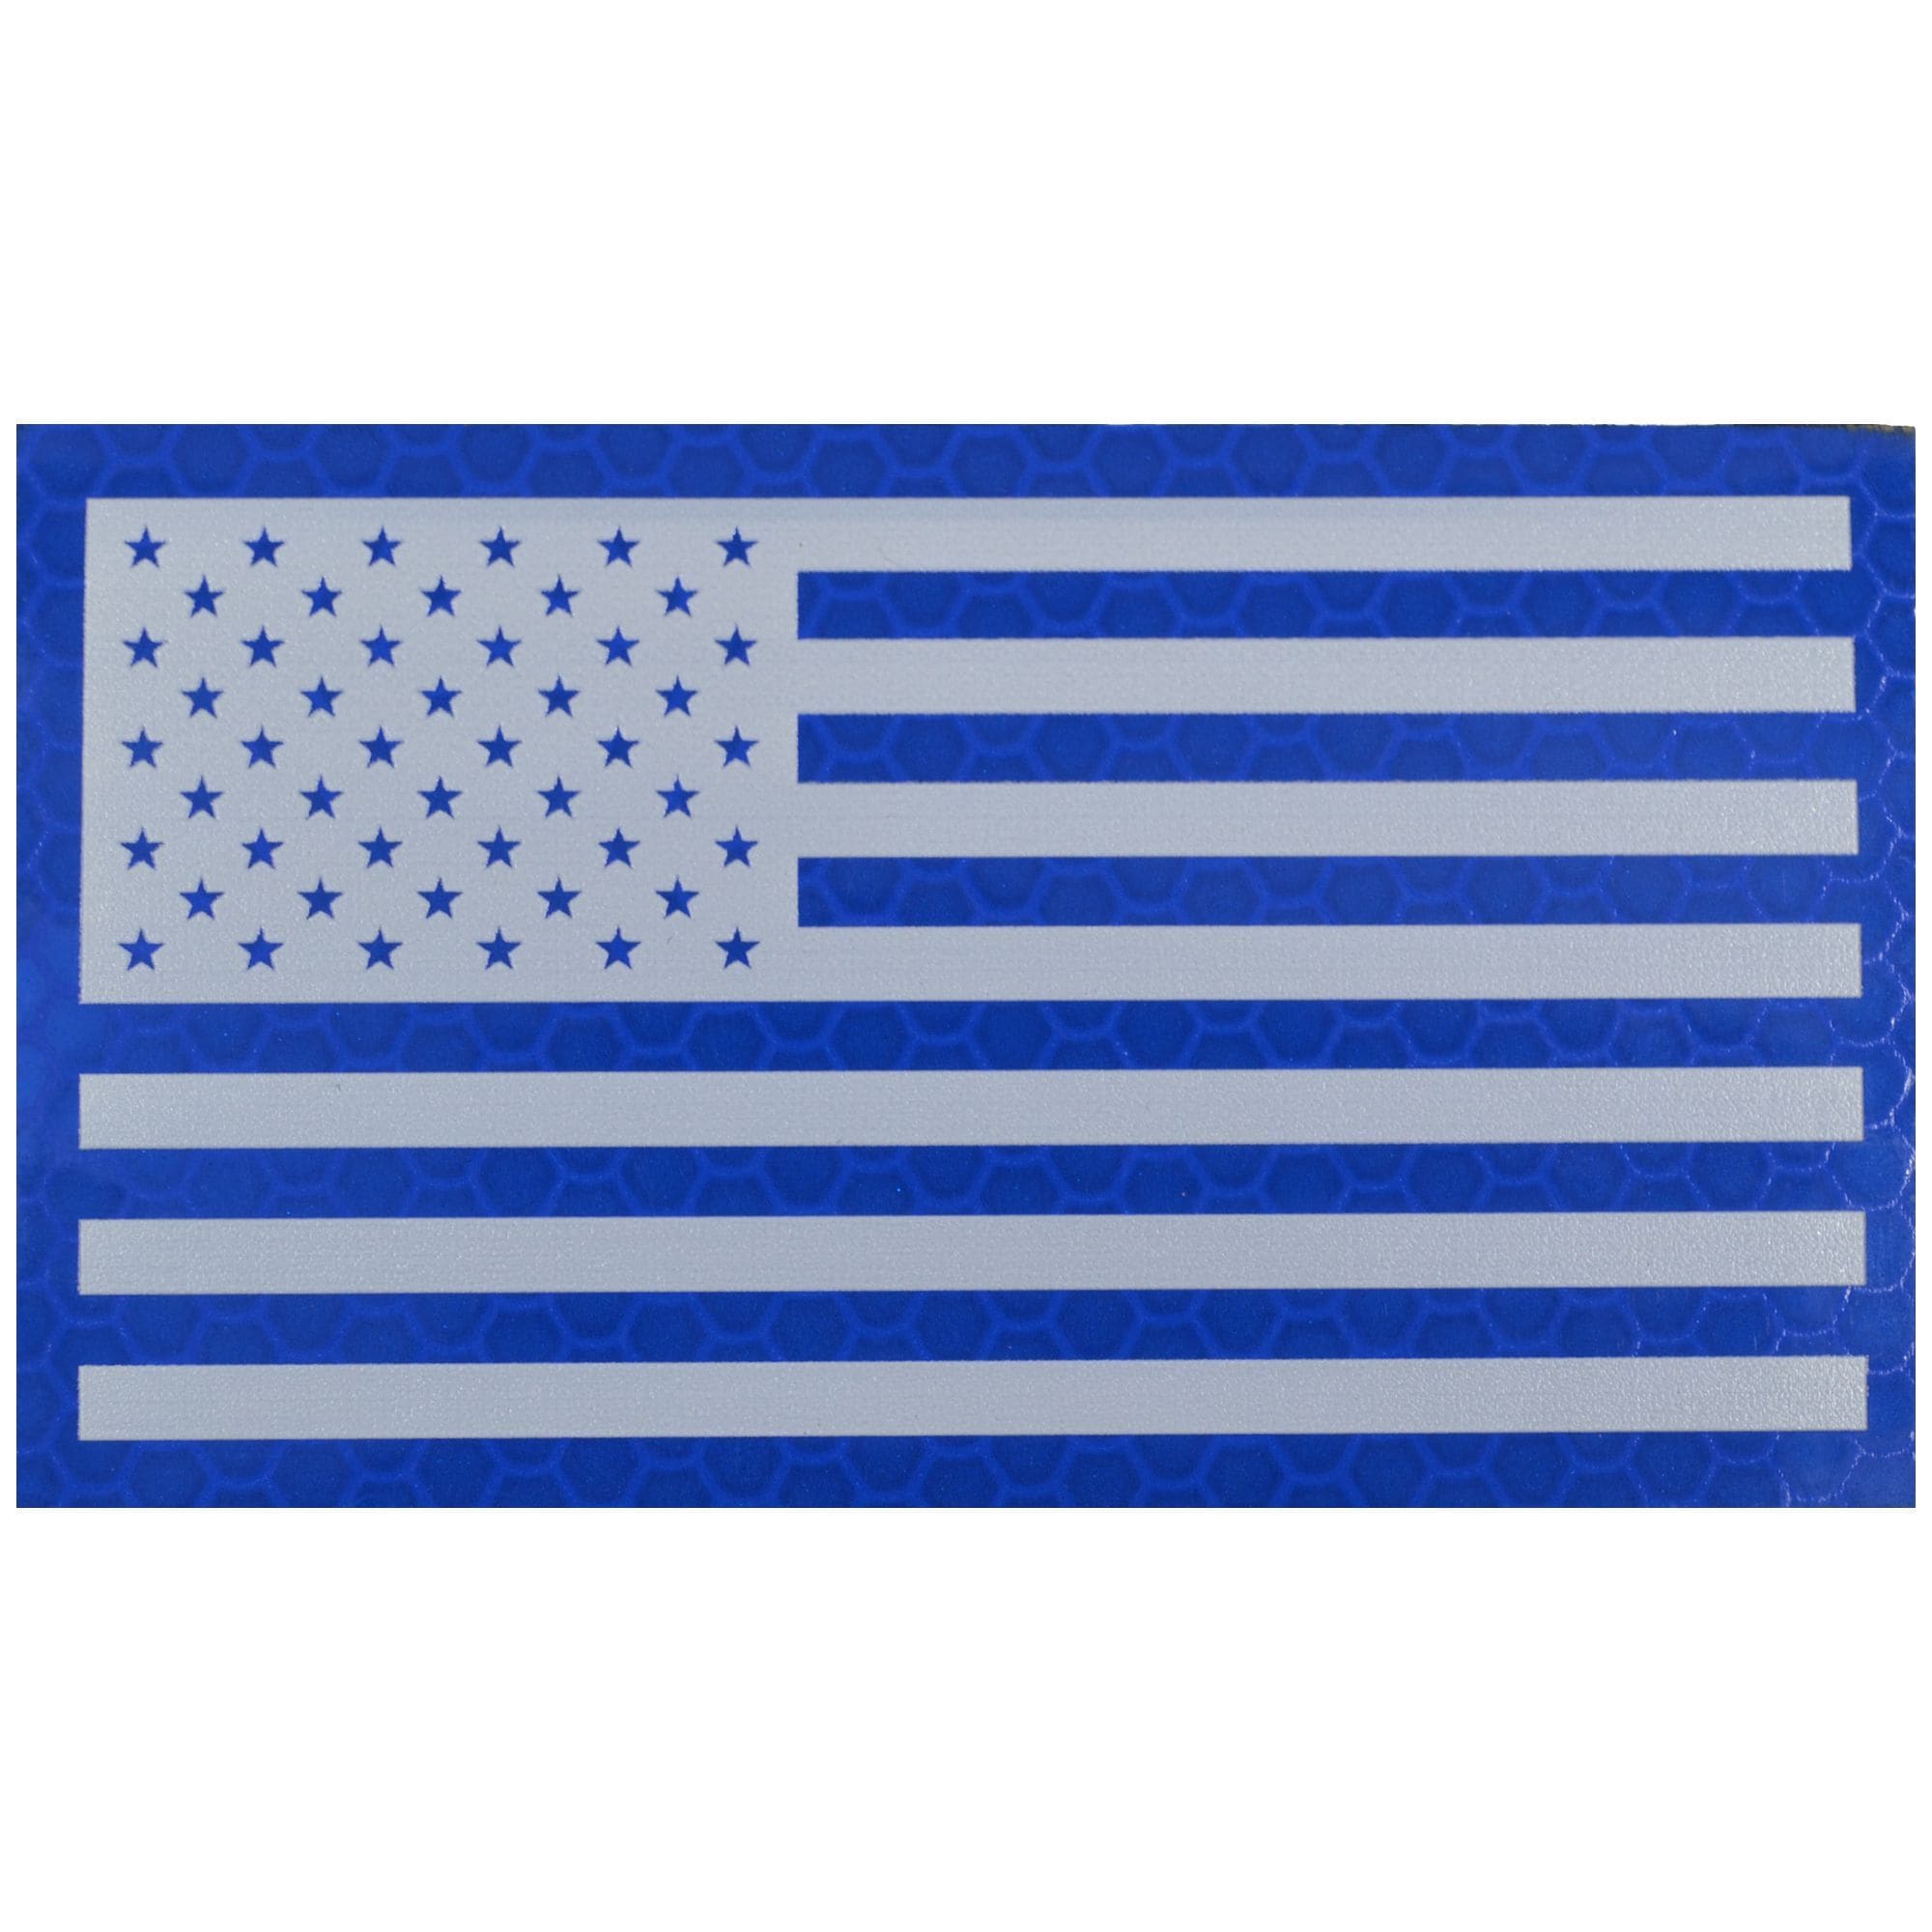 Tactical Gear Junkie Patches Forward Reflective Printed Blue/White USA Flag - 2x3.5 Patch